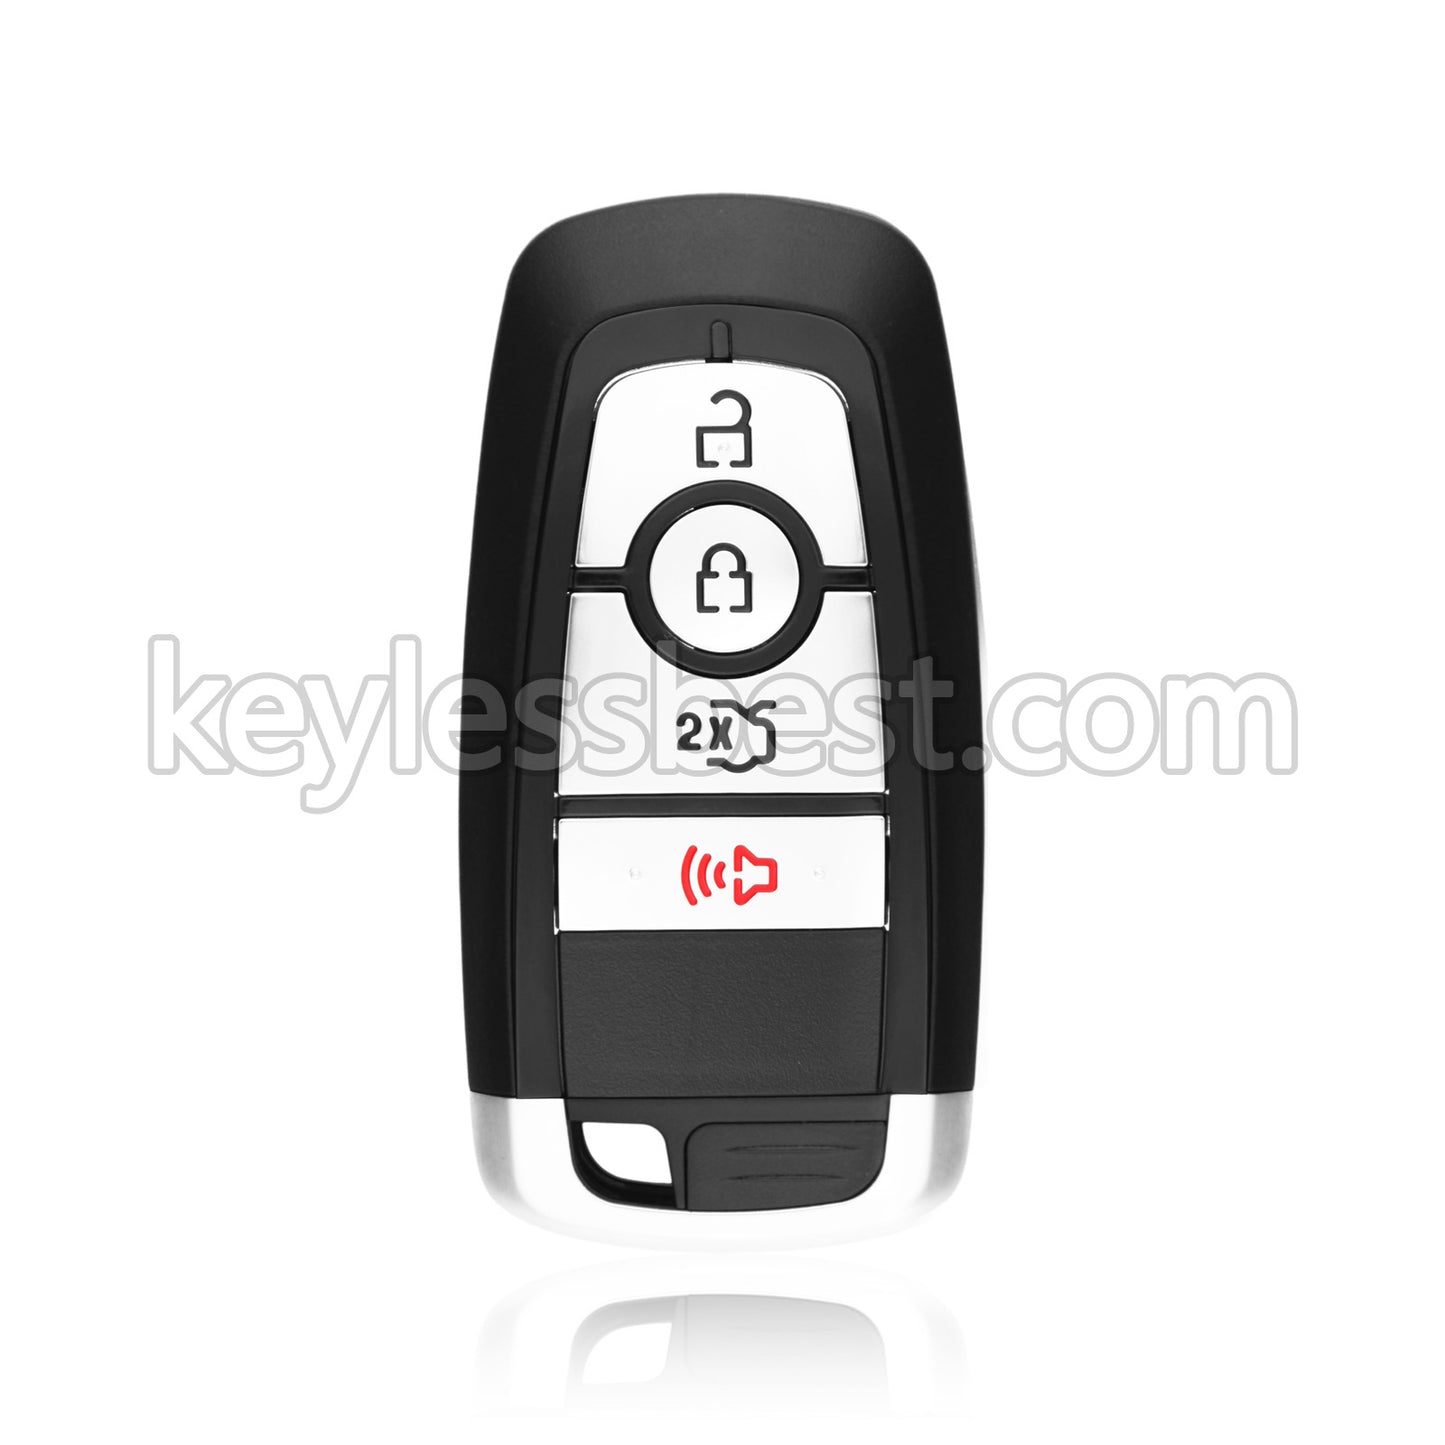 2017 - 2022 Ford Edge Explorer Fusion Mustang / 4 Buttons Remote Key / M3N-A2C93142300 / 315MHz